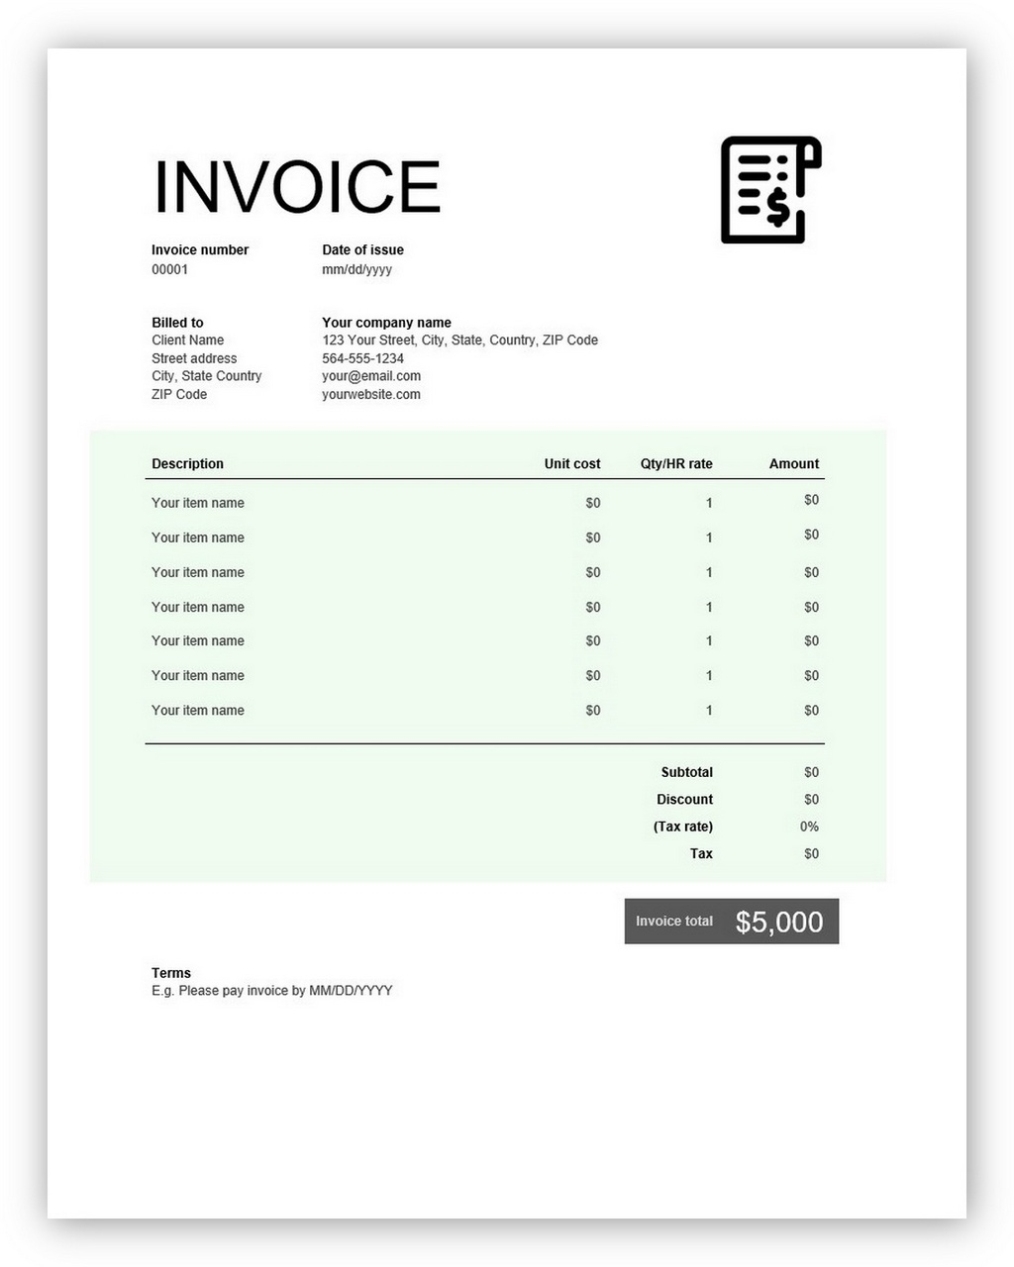 7 Free Quickbooks Invoice Template Word, Excel, Pdf And How To Create It - Hennessy Events Pertaining To Quickbooks Online Invoice Templates